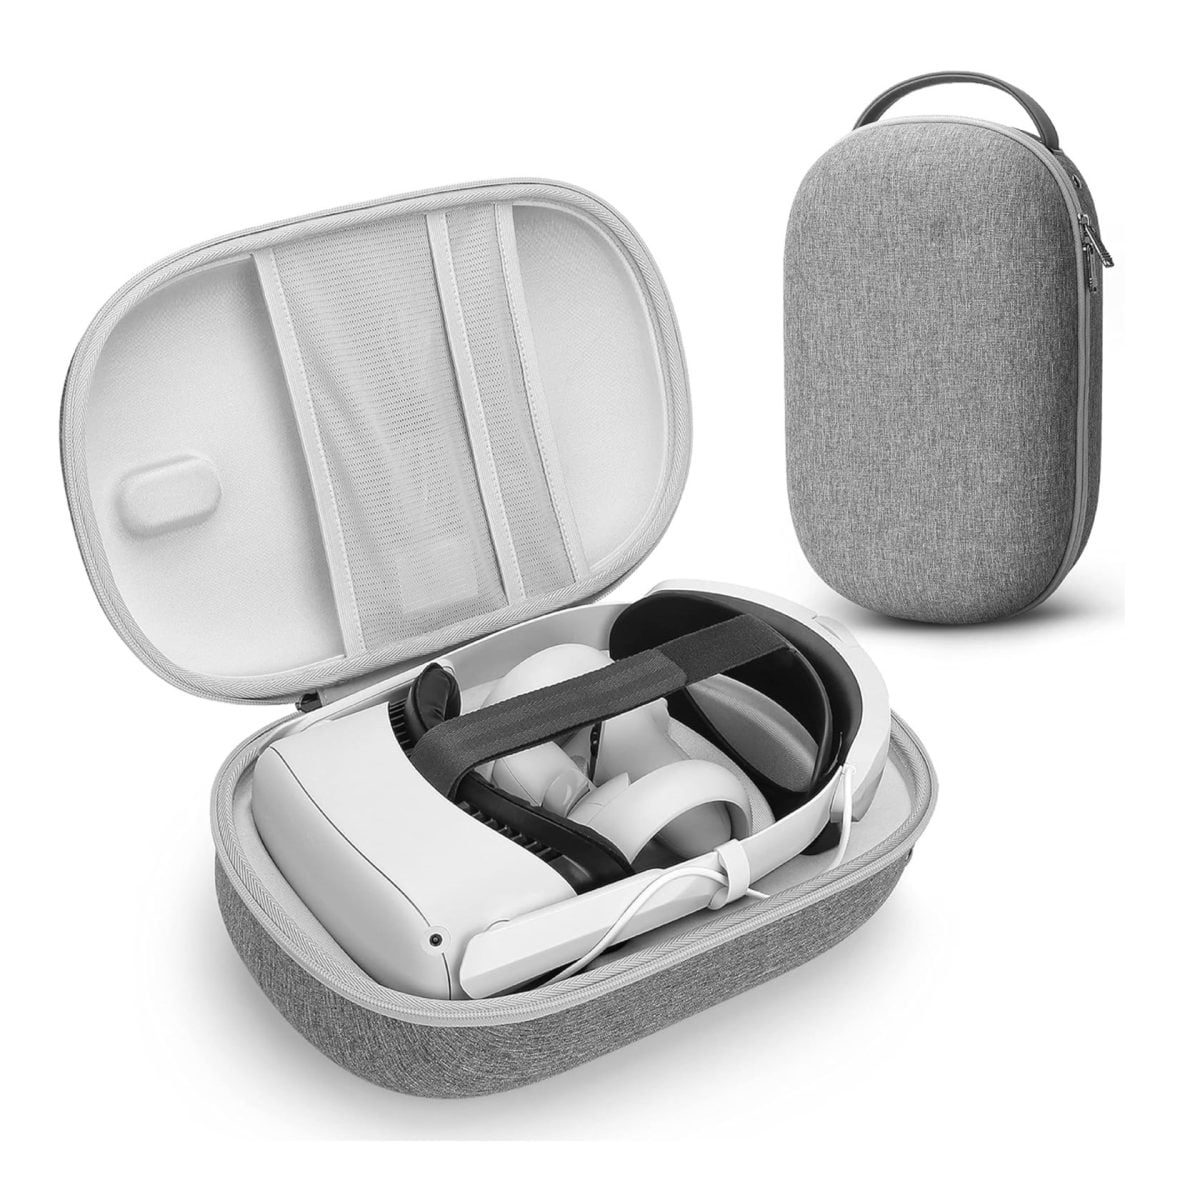 Blupebble  Lightweight And Portable Carry Case Design Made For Meta Quest 2